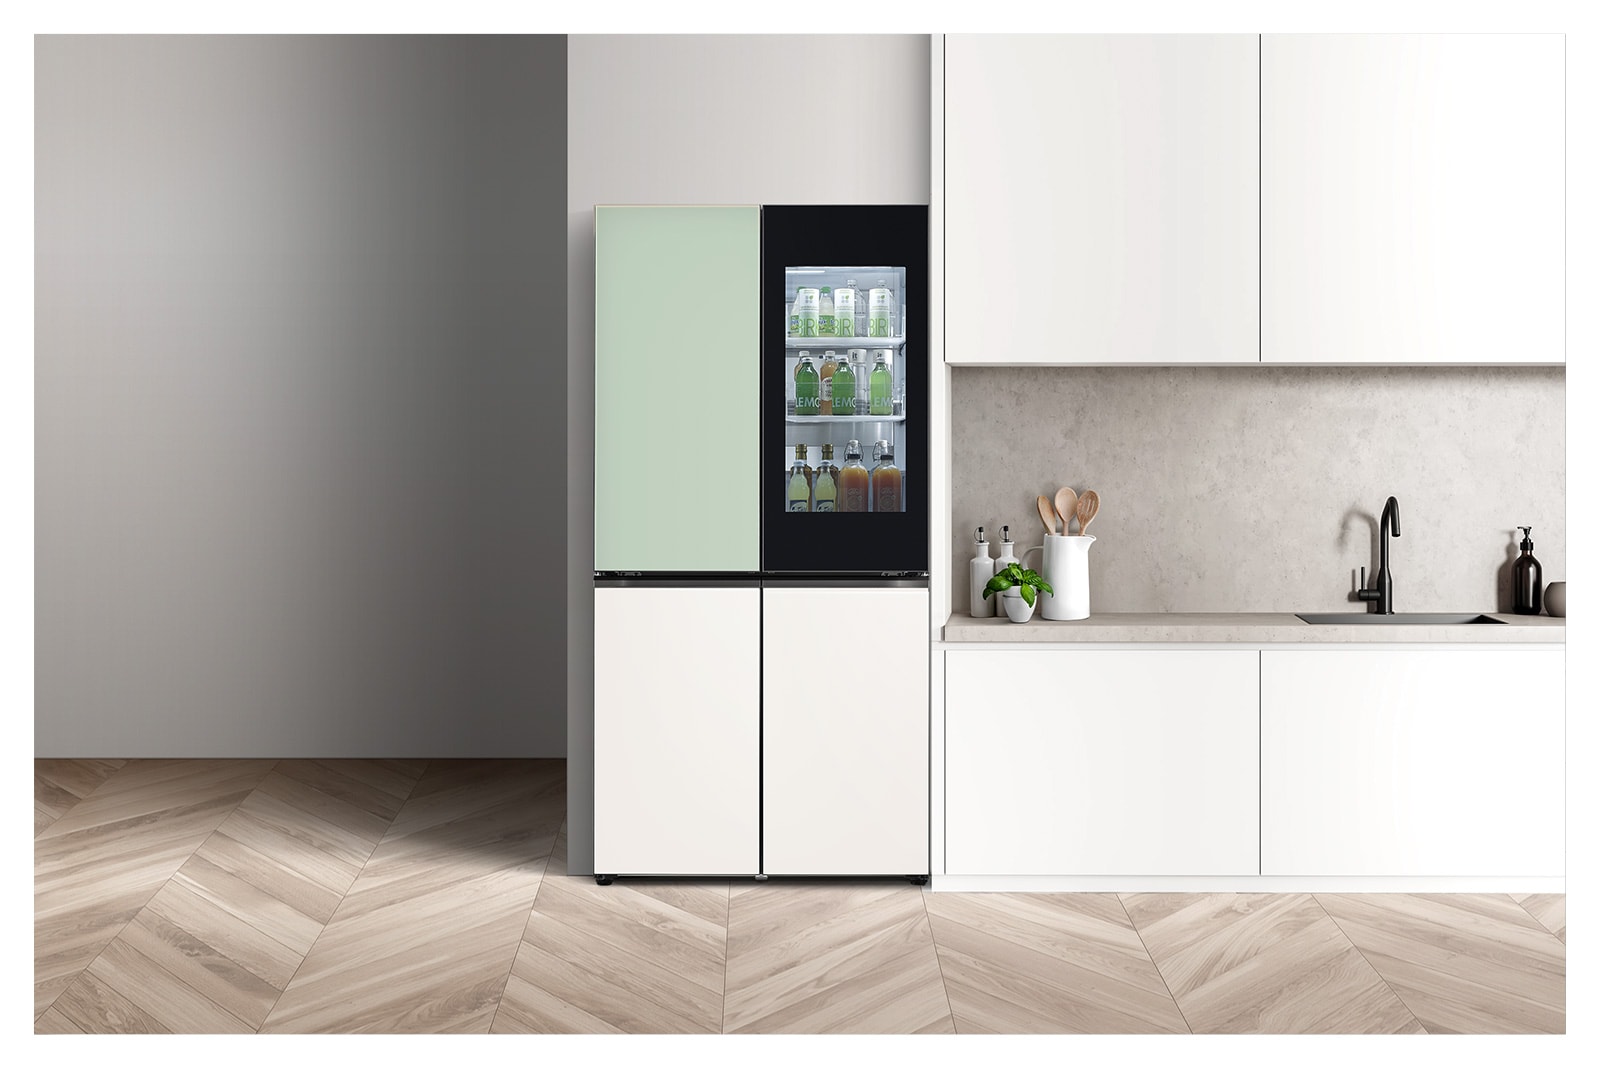 It shows mist mint&beige color LG French Door Objet Collection is placed in a light-tone modern kitchen.